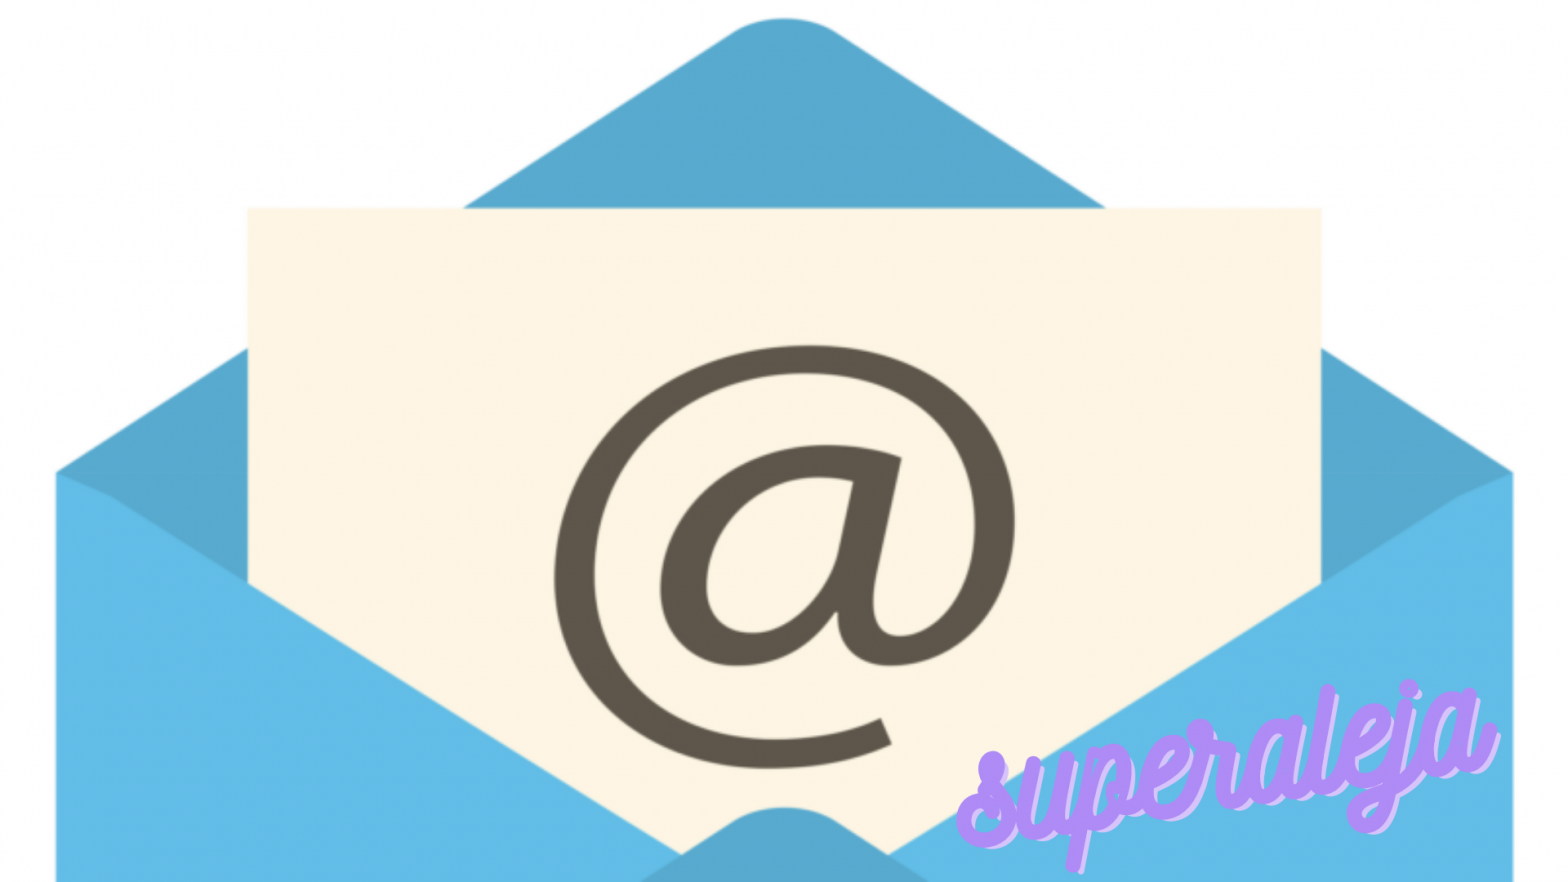 An image of a blue envelope, open, with a cream colored sheet peeking out that has the at sign on it (meant to signify email). At the bottom in light purple cursive text reads: superaleja